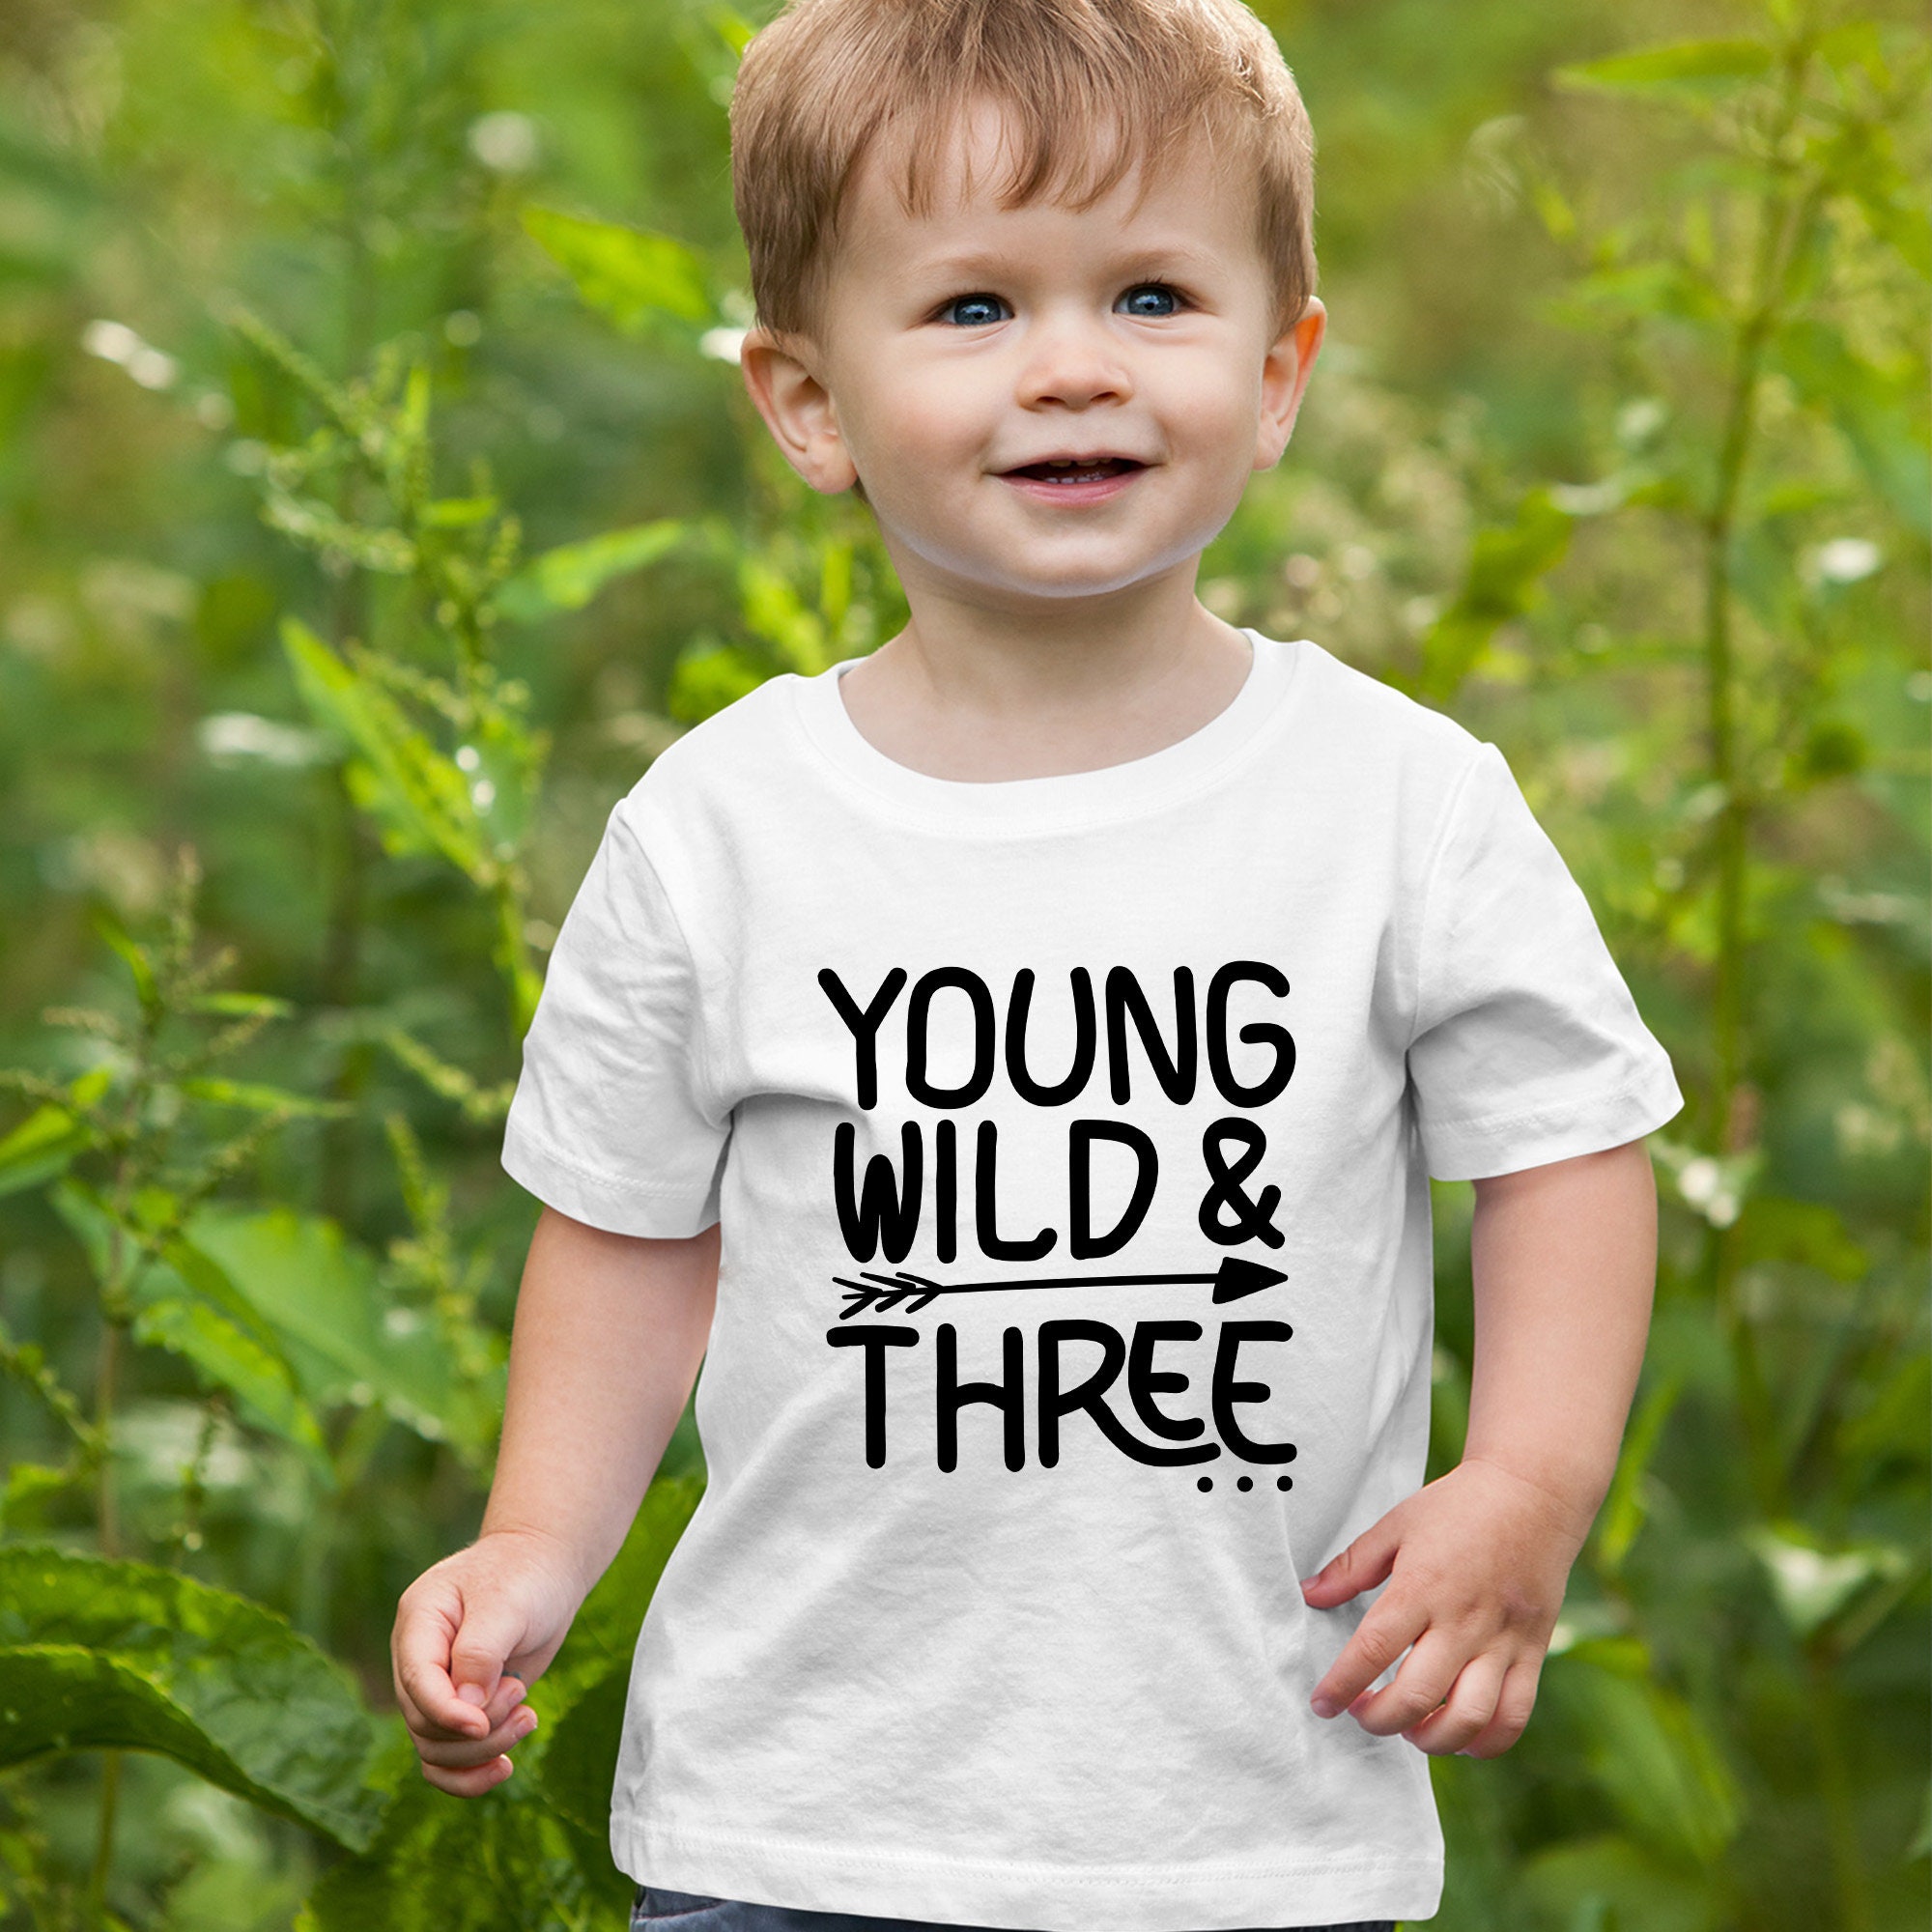 itkidboy 3rd Birthday Shirt boy Third Outfit 3 Year Old Toddler Gift Baby Tshirt Party Shirts 